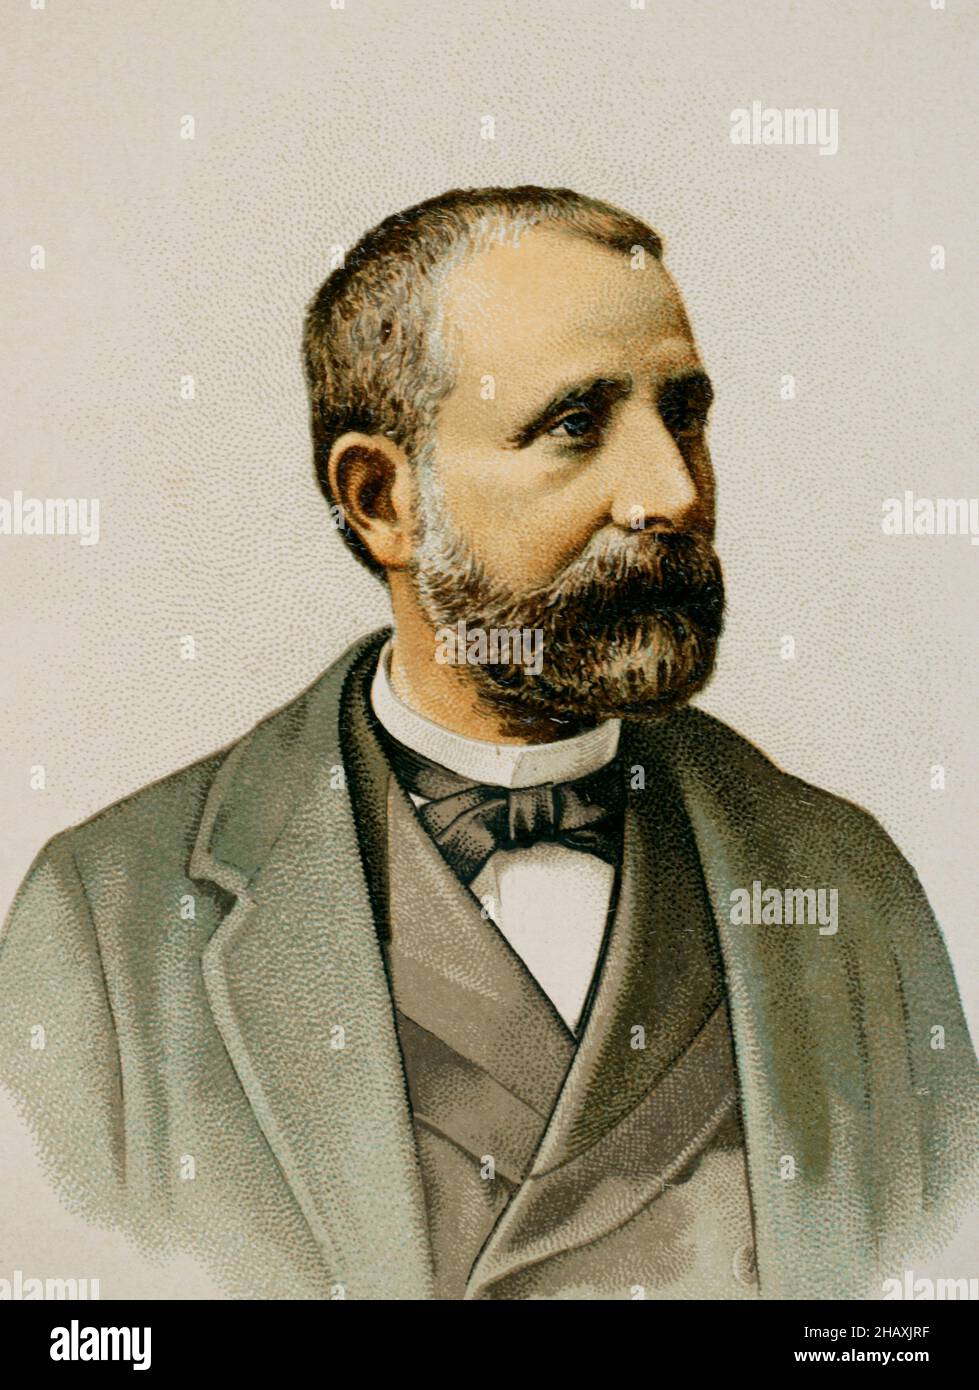 Gaspar Núñez de Arce (1832-1903). Spanish poet and politician. He took an active part in the Glorious Revolution of September 1868 to dethrone Isabella II. Minister of Overseas in 1883 in the government presided over by Sagasta. Portrait. Chromolithography. 'Historia General de España' (General History of Spain), by Miguel Morayta. Volume VIII. Madrid, 1894. Stock Photo